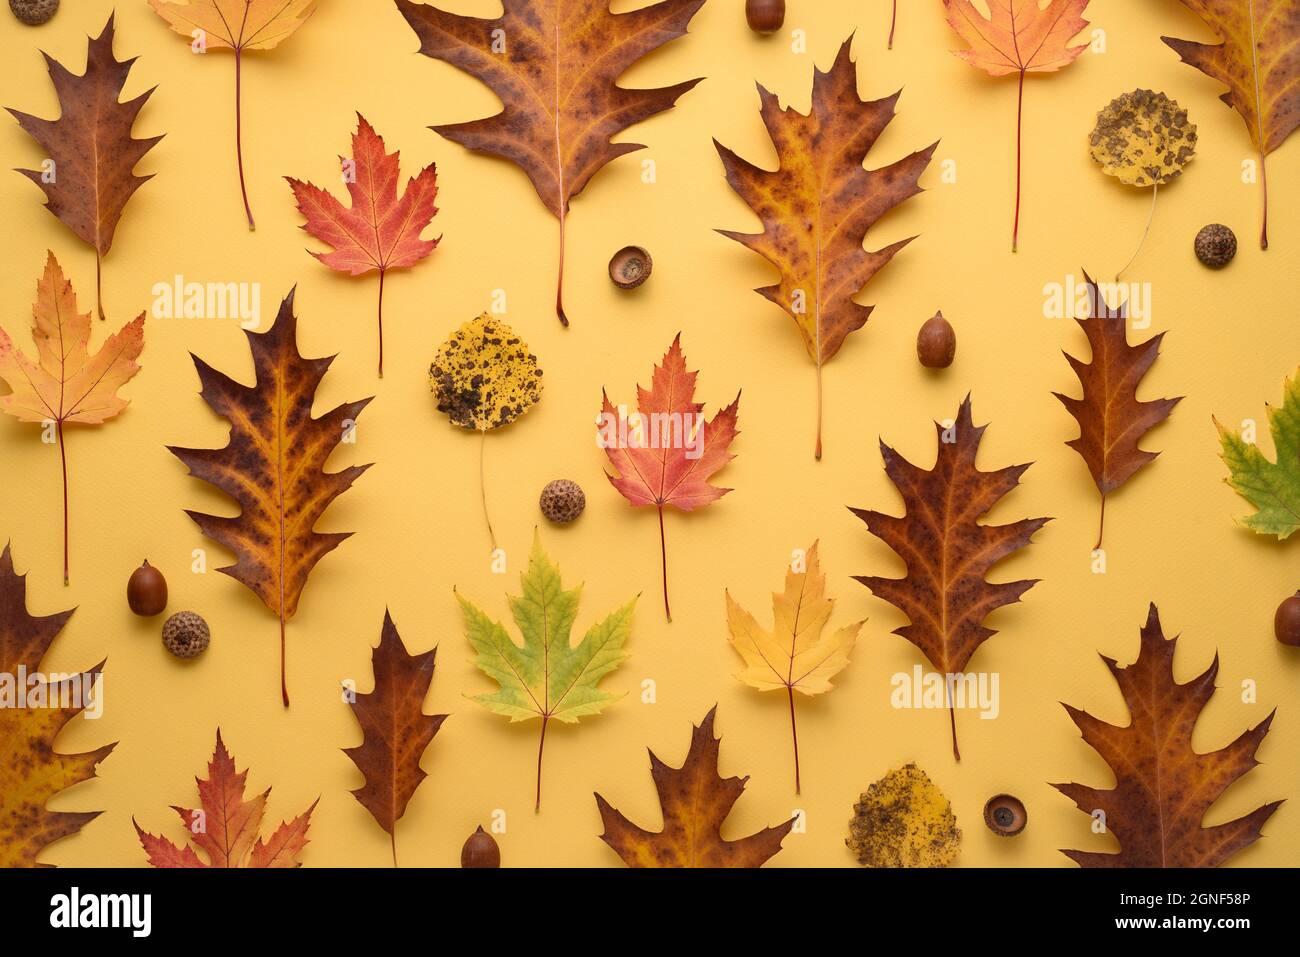 Autumn pattern of fallen leaves and acorns on a yellow background. Herbarium composition Stock Photo